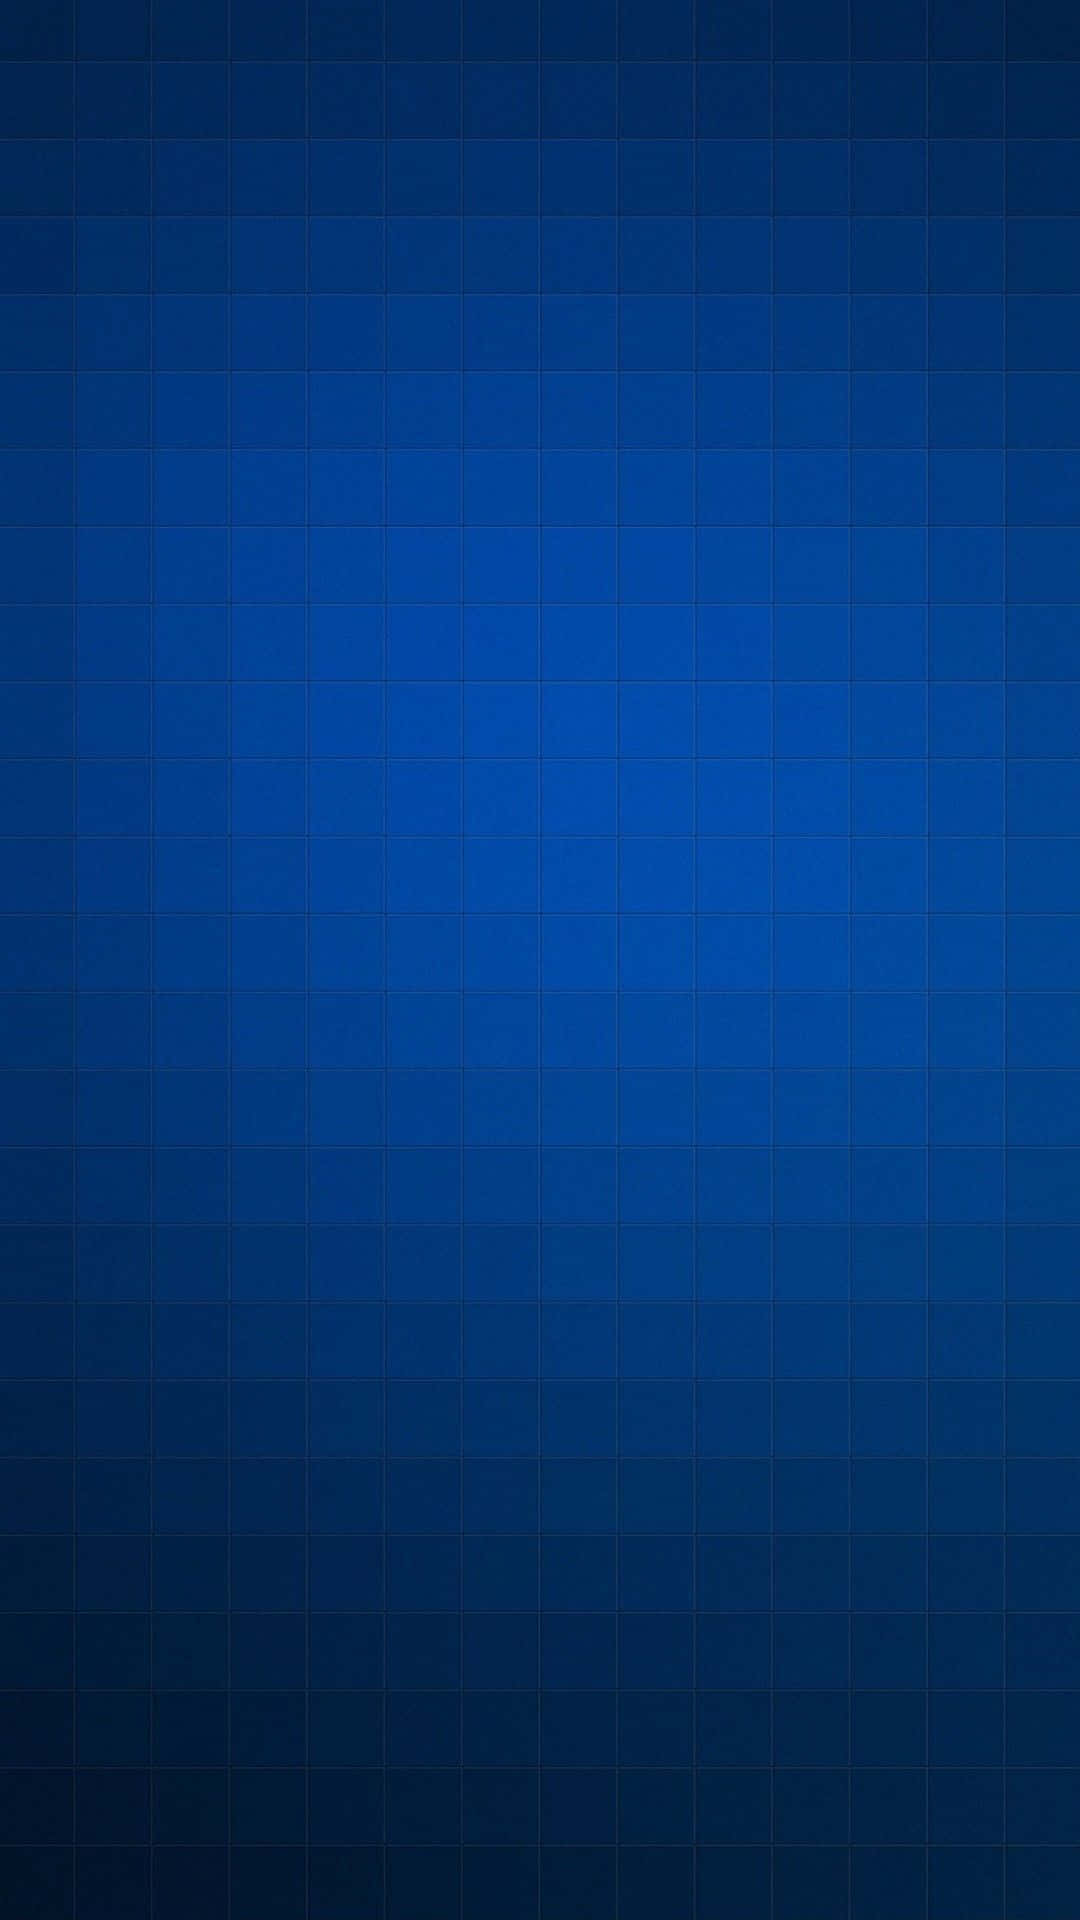 Download the awesome Cool Blue Abstract Iphone wallpaper. Wallpaper